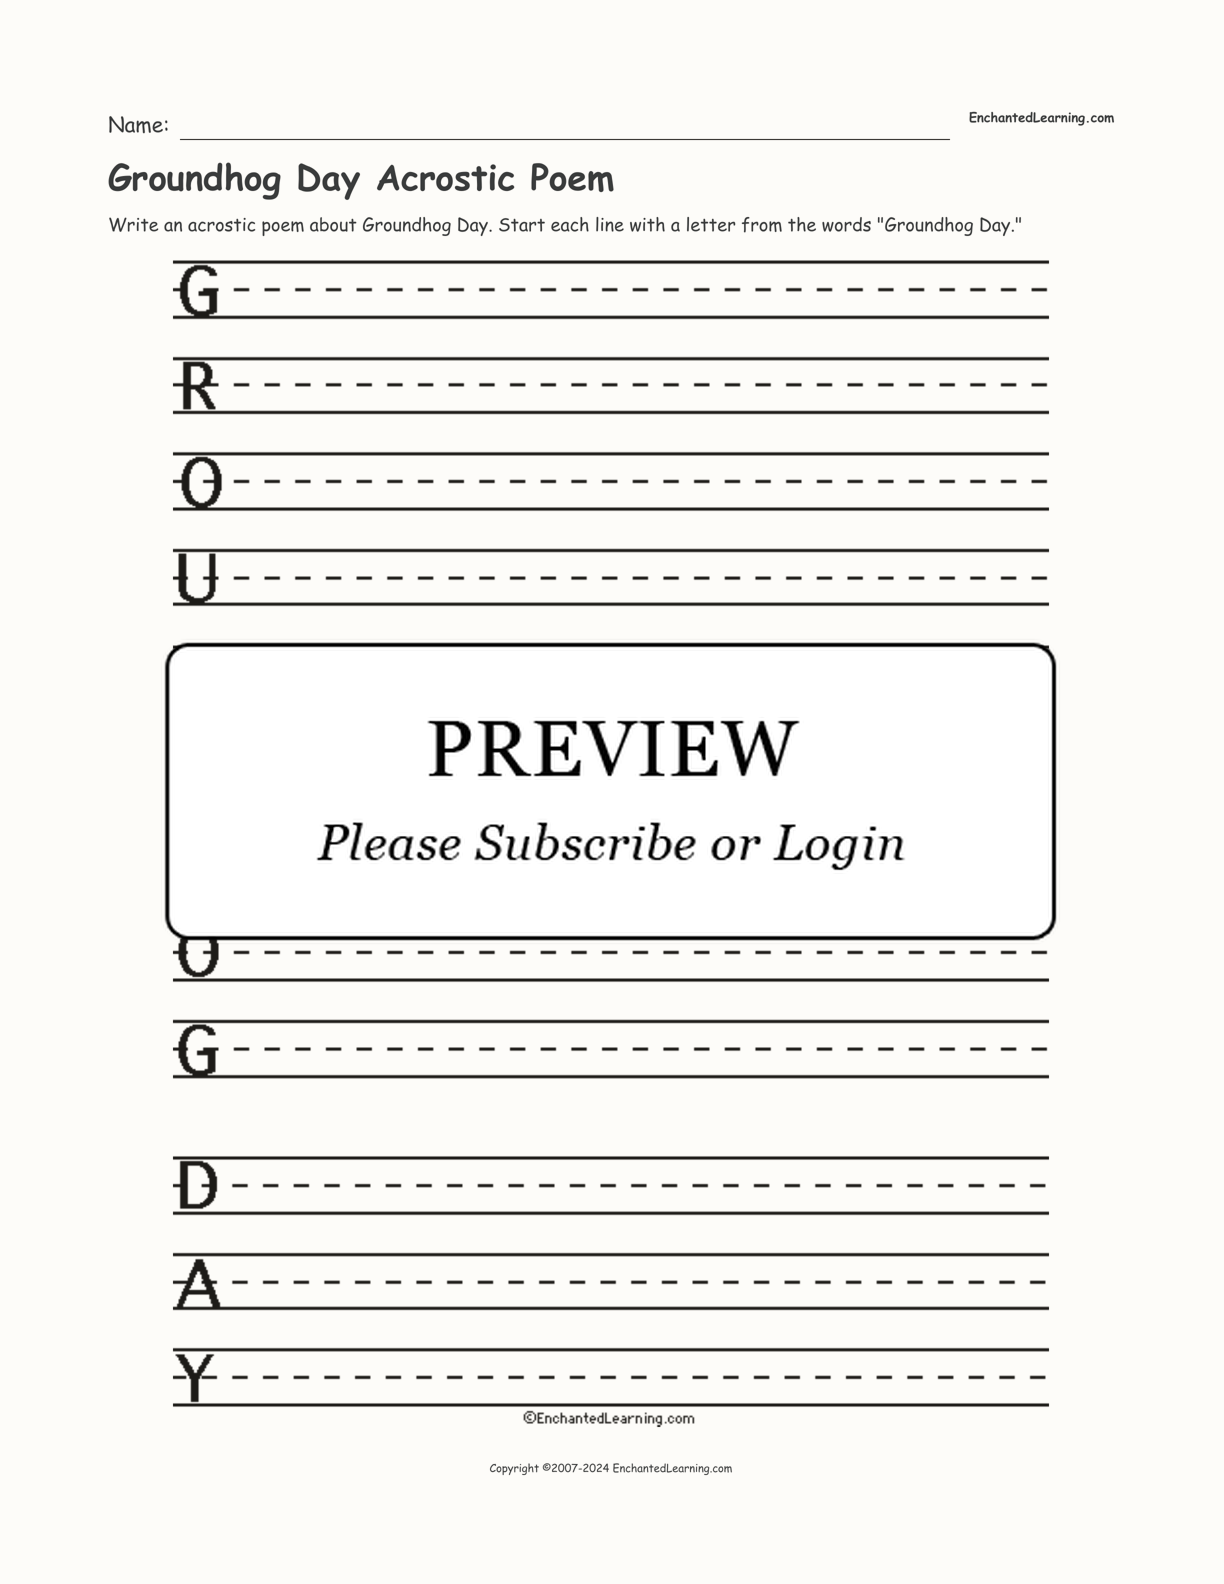 Groundhog Day Acrostic Poem interactive printout page 1